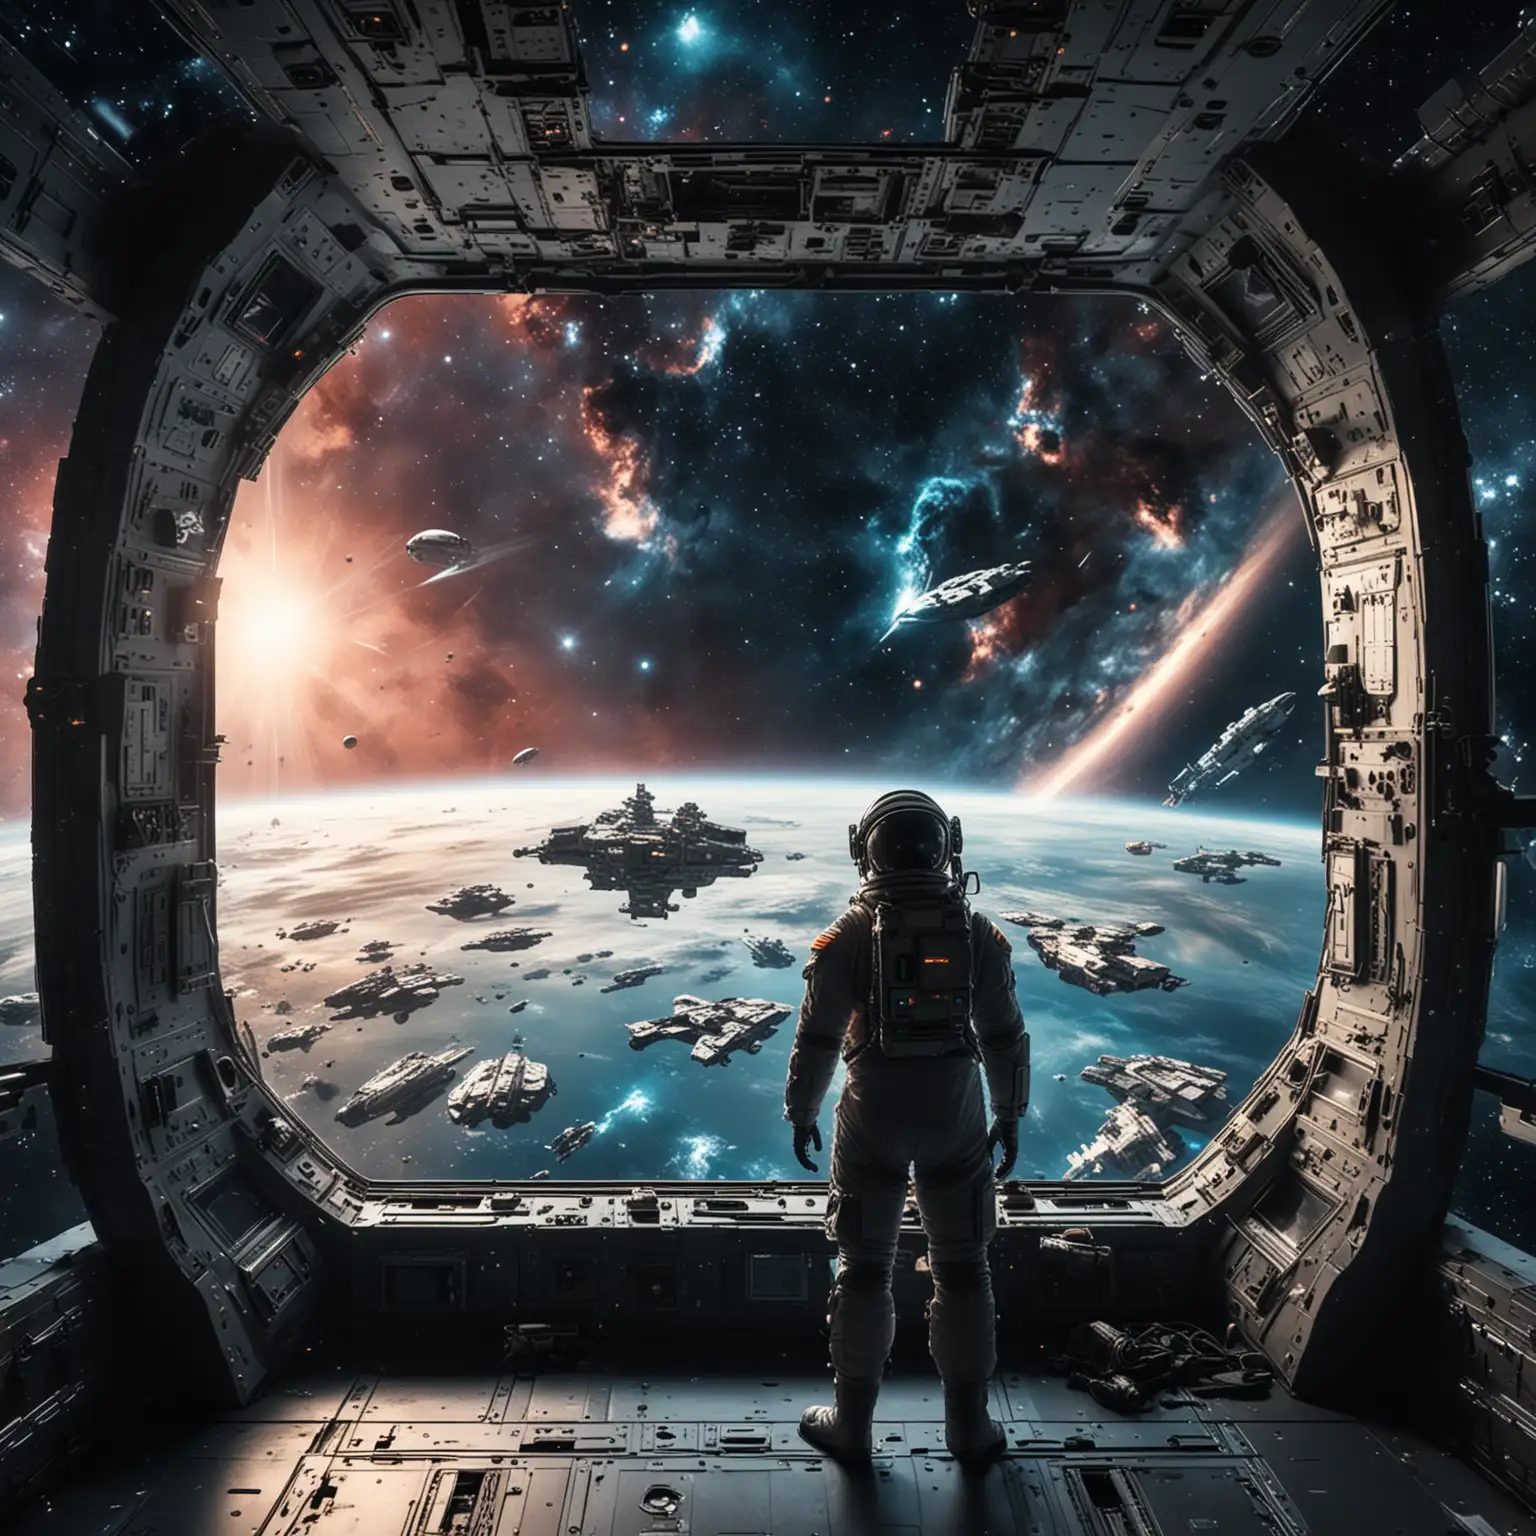 Astronaut stands large command centre of a spaceship looks out of a large window to a large fleet of ships in a nebula in empty space, and NO PLANET